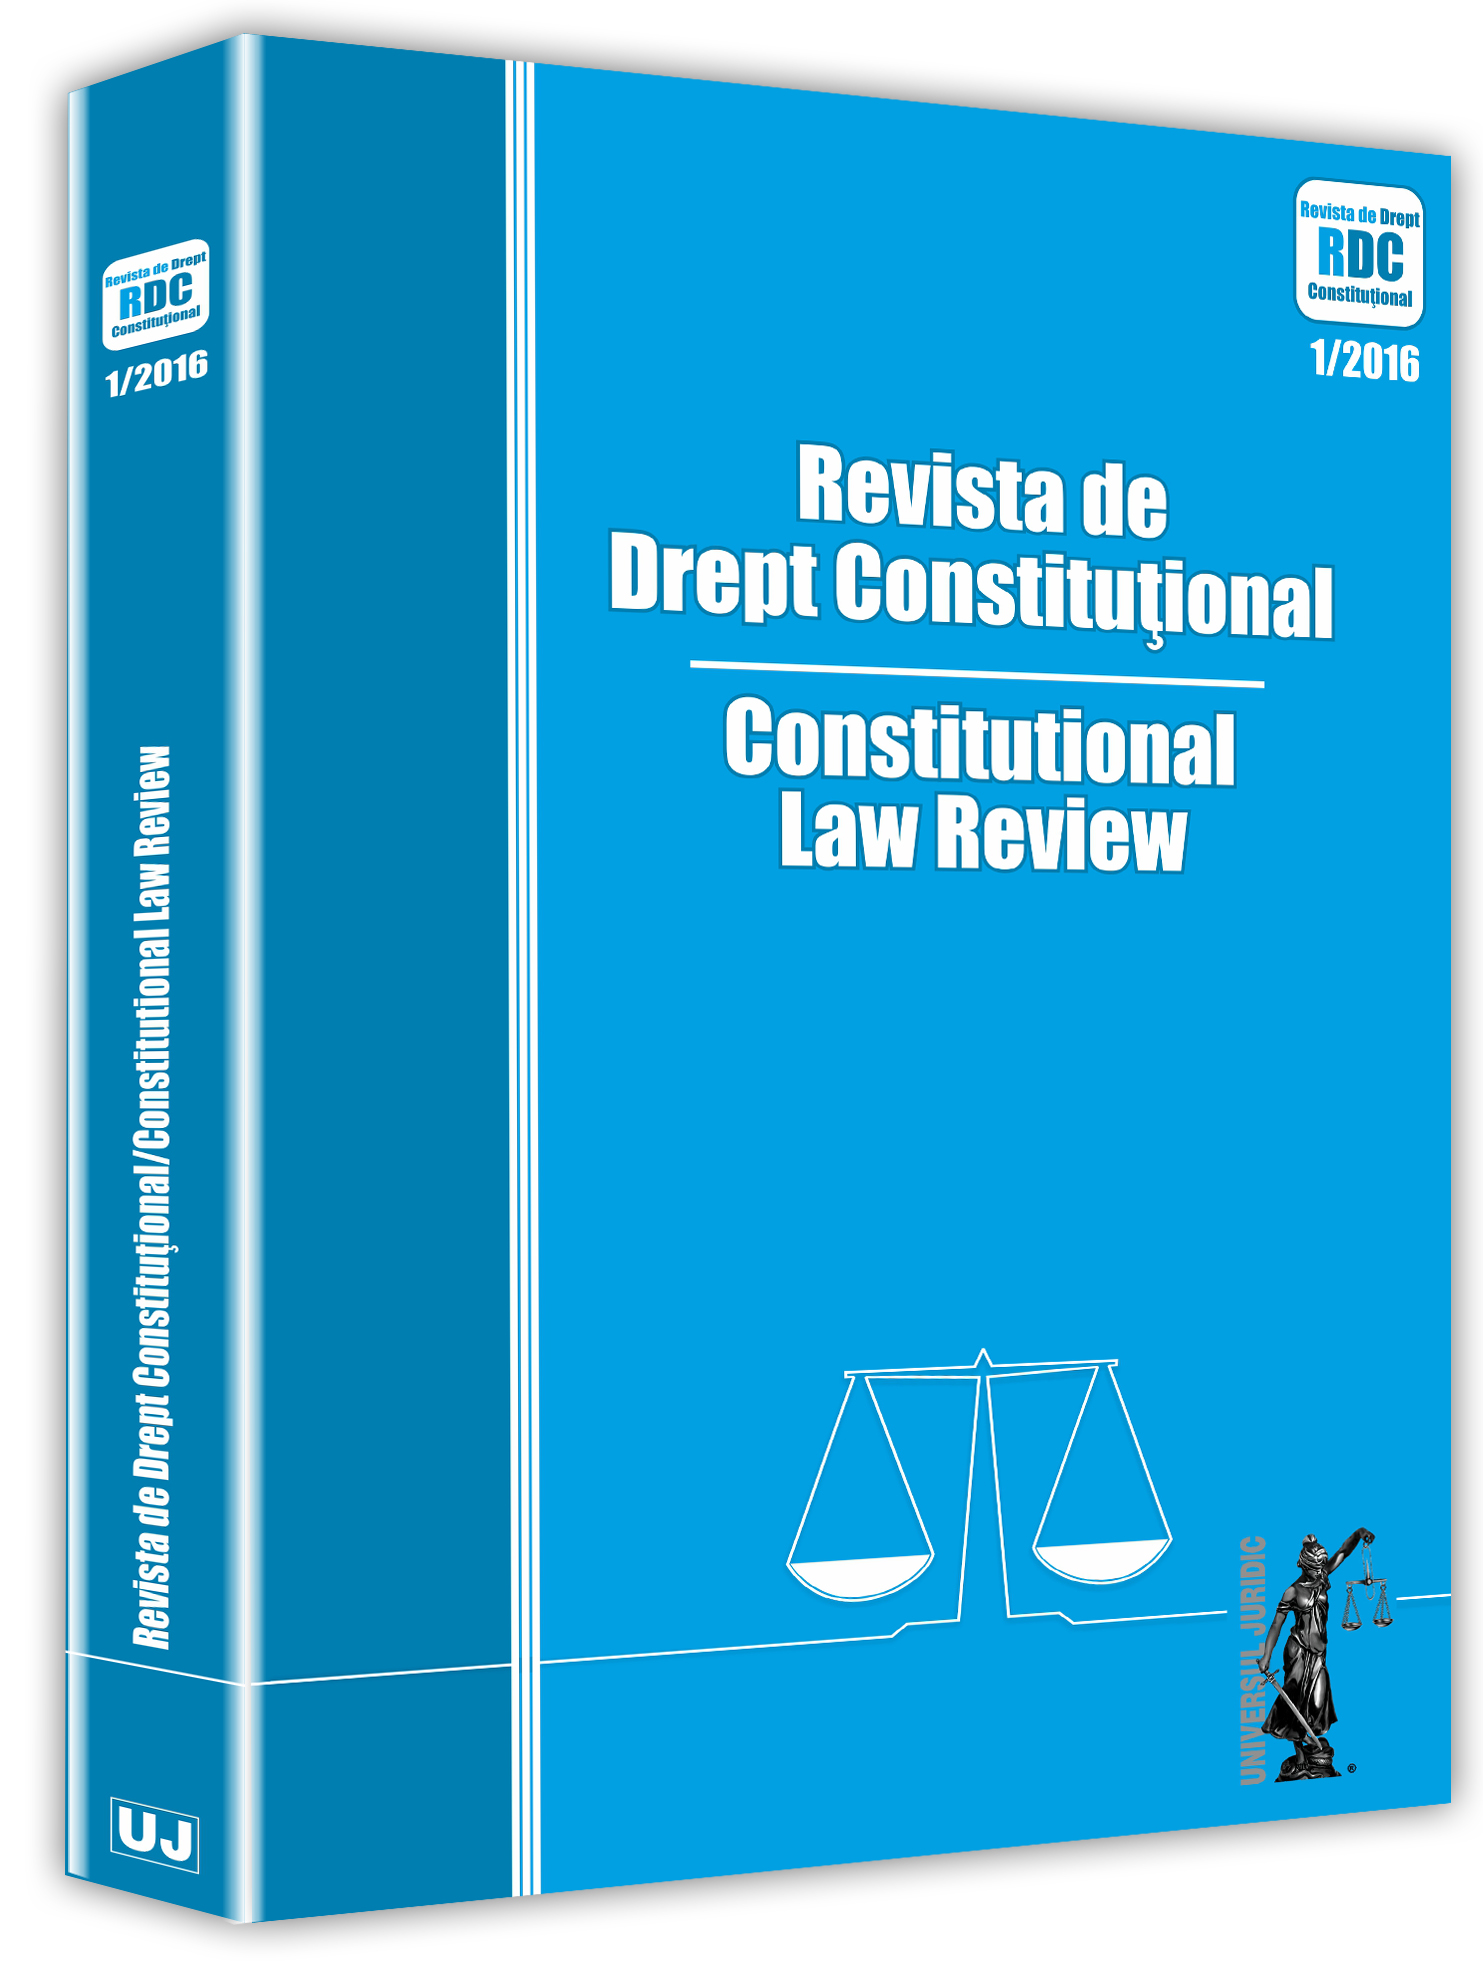 Relationships between national, international and european law within the constitutional review in Romania